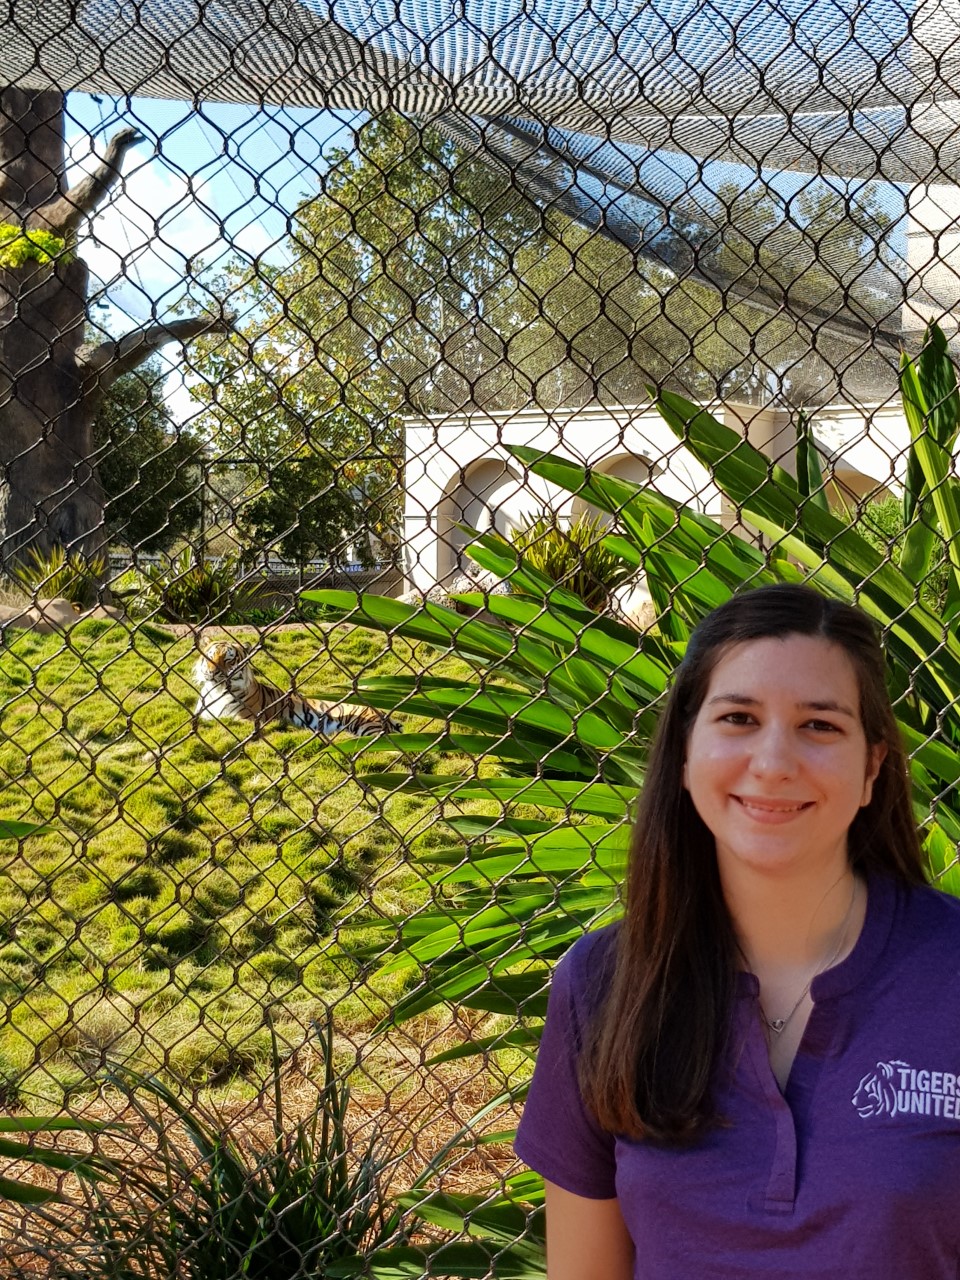 Image of Alessandra Bresnan standing outside Mike the Tiger's habitat